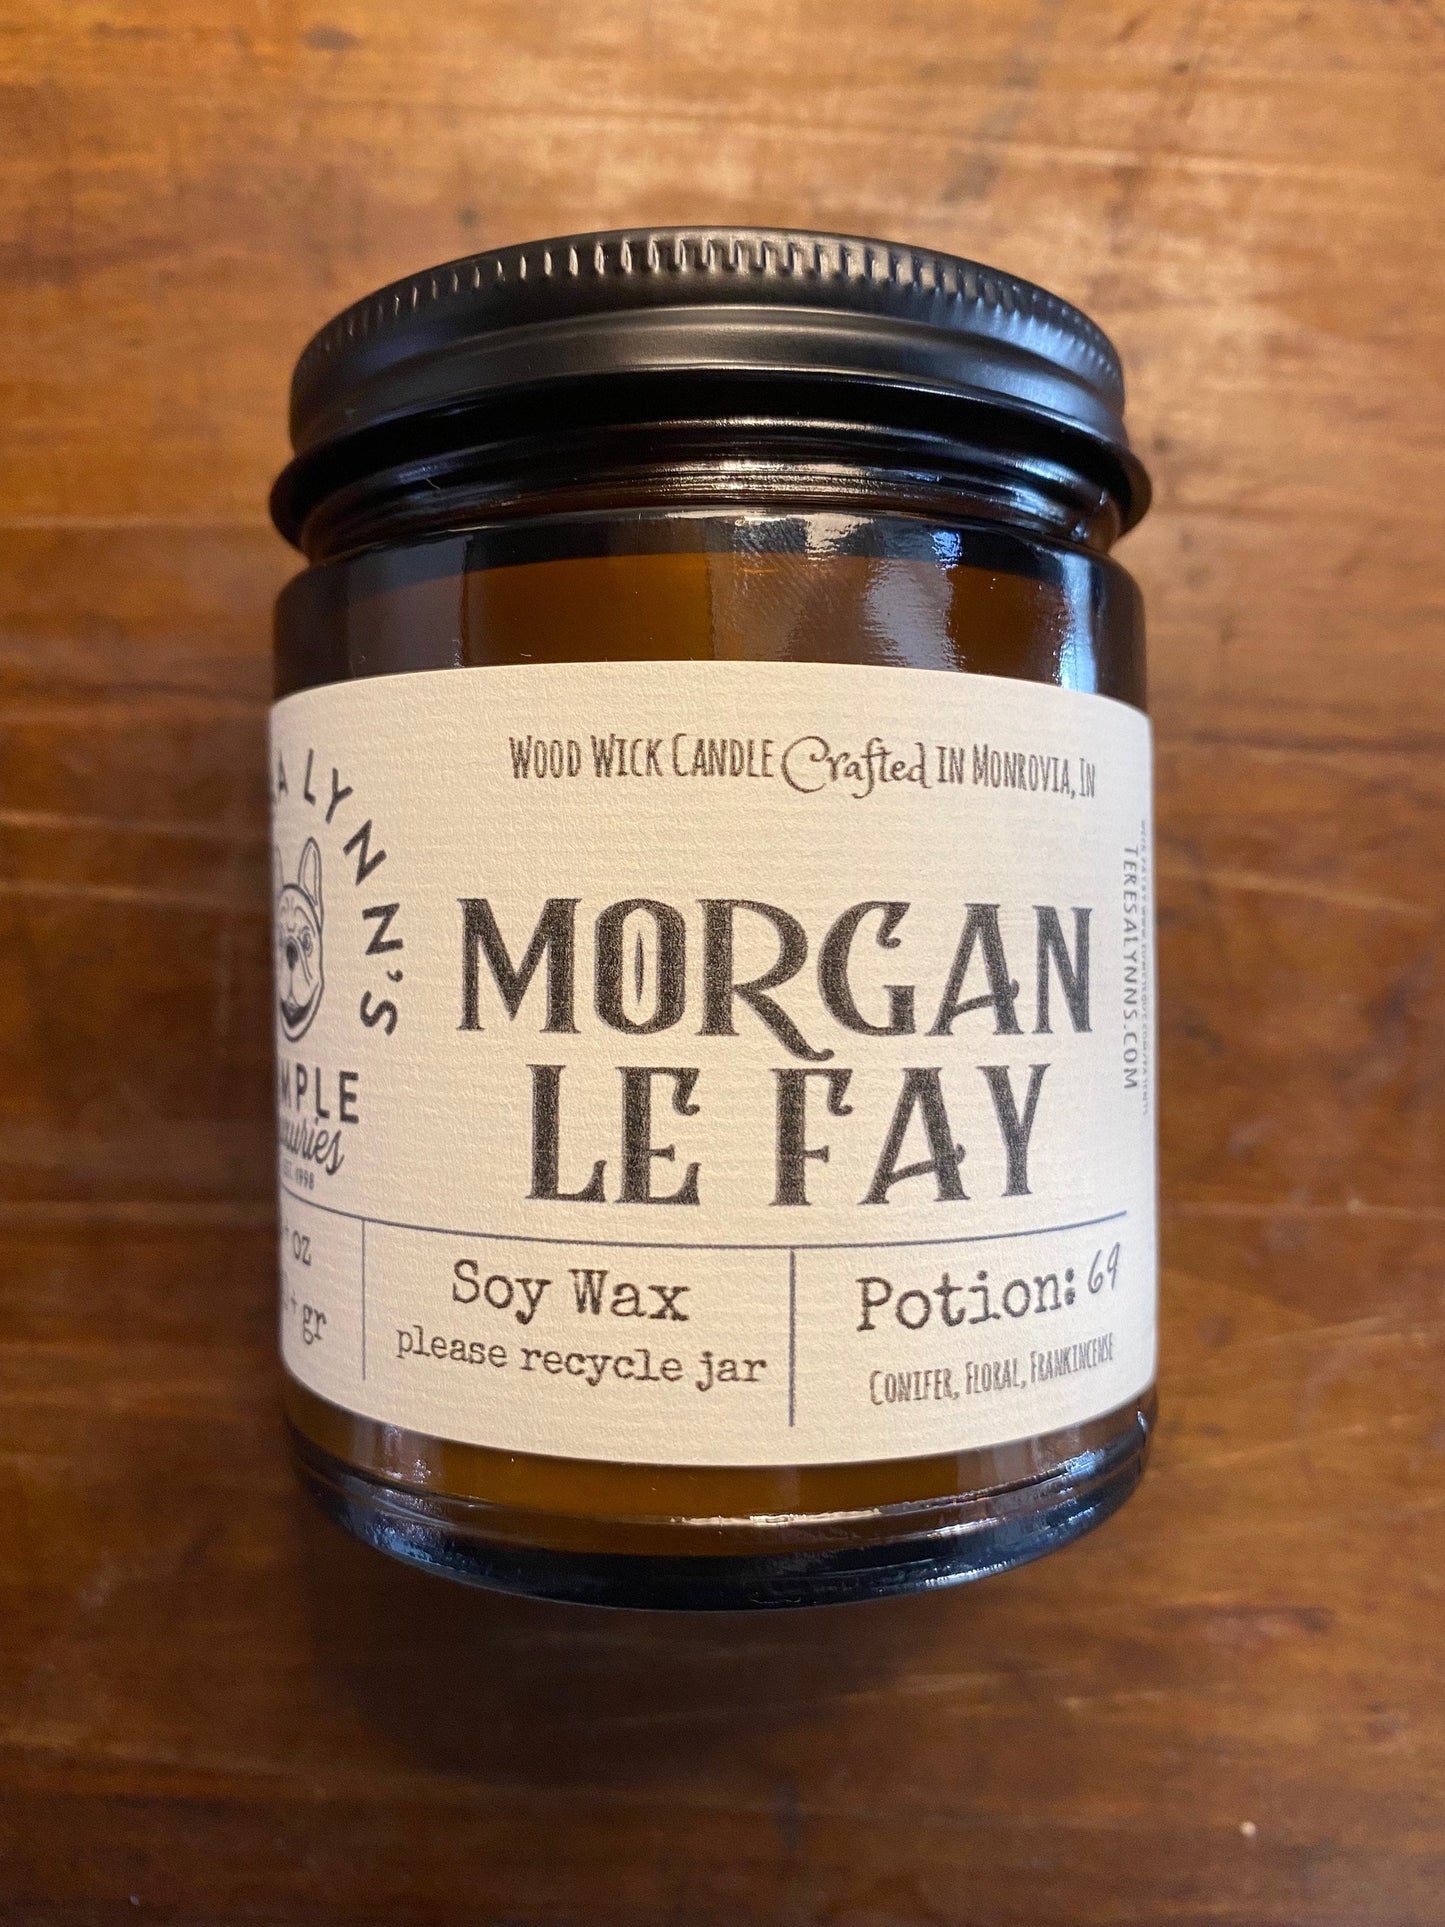 Morgan le Fay, wooden wick, soy candle, luxury candle, sultry, witch, patchouli, jasmine, oud, frankincense, myrrh, ember, witch aesthetic